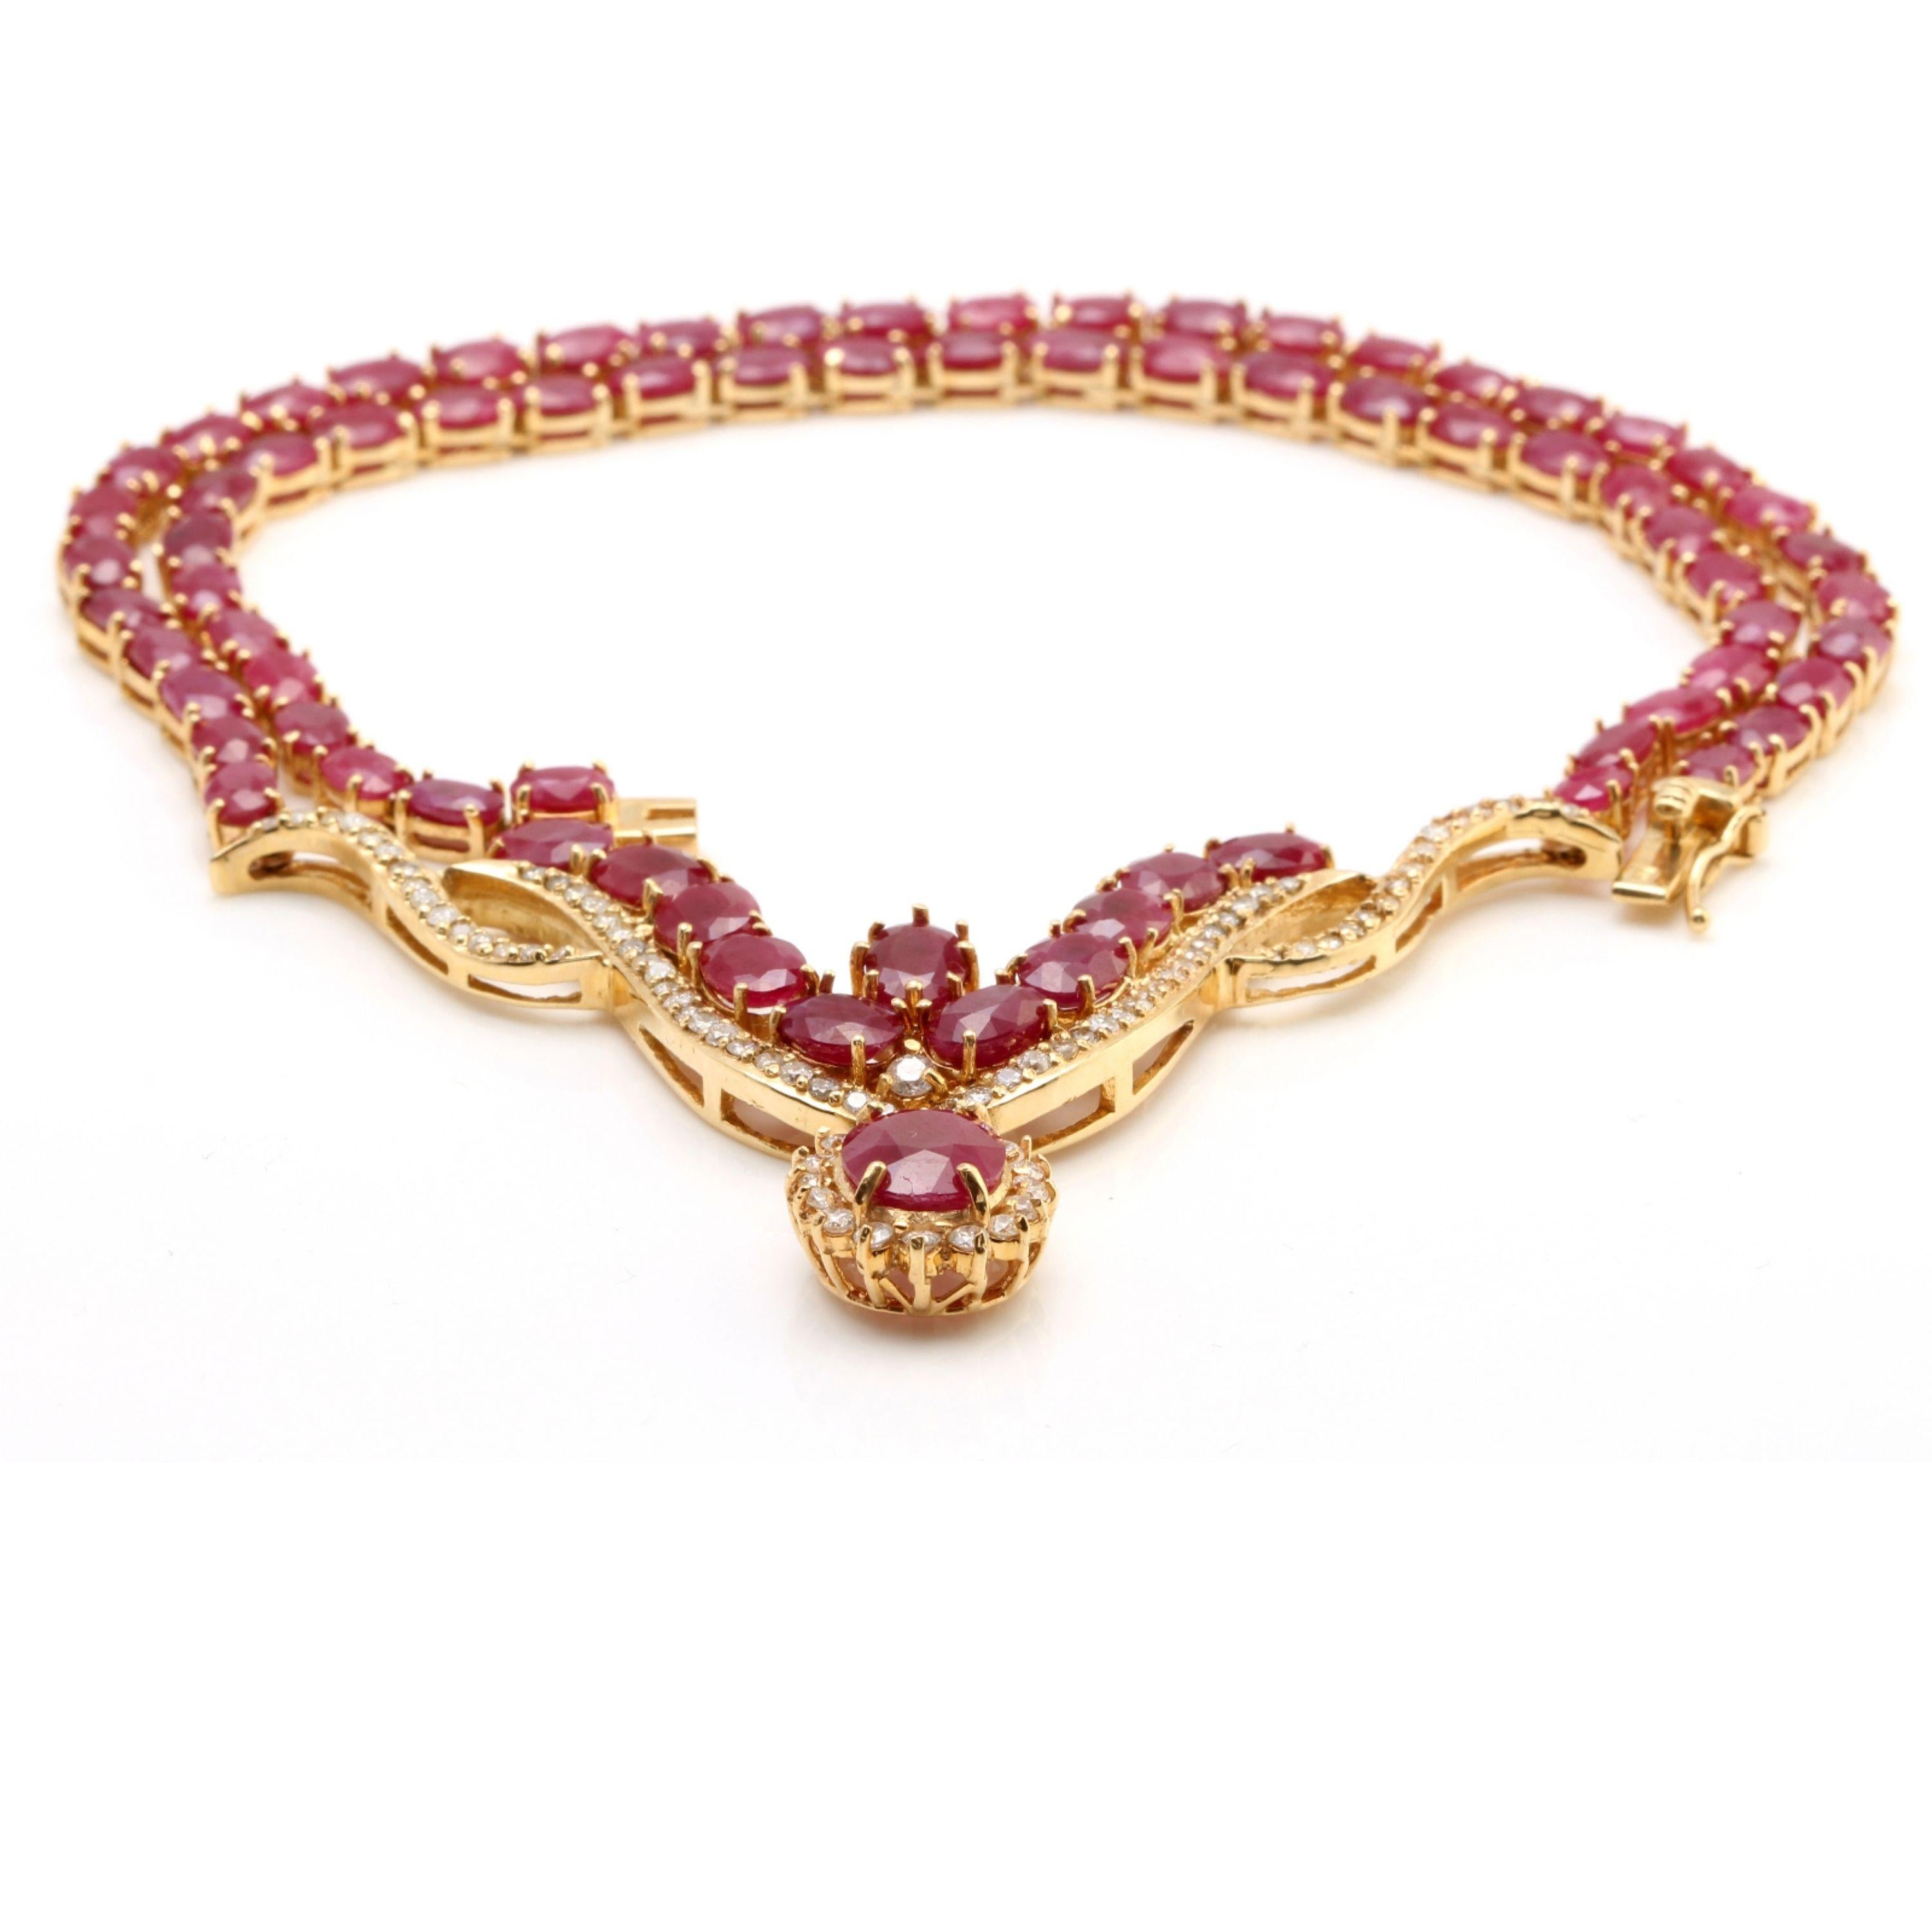 54.14Ct Natural Red Ruby and Diamond 14K Solid Yellow Gold Necklace

Amazing looking piece!

Stamped: 14K

Total Natural Oval Rubies Weight is Approx. 48.62 Carats

Center Natural Ruby Weight is: 3.80 Carats

Total Natural Diamond Weight is: 1.72Ct